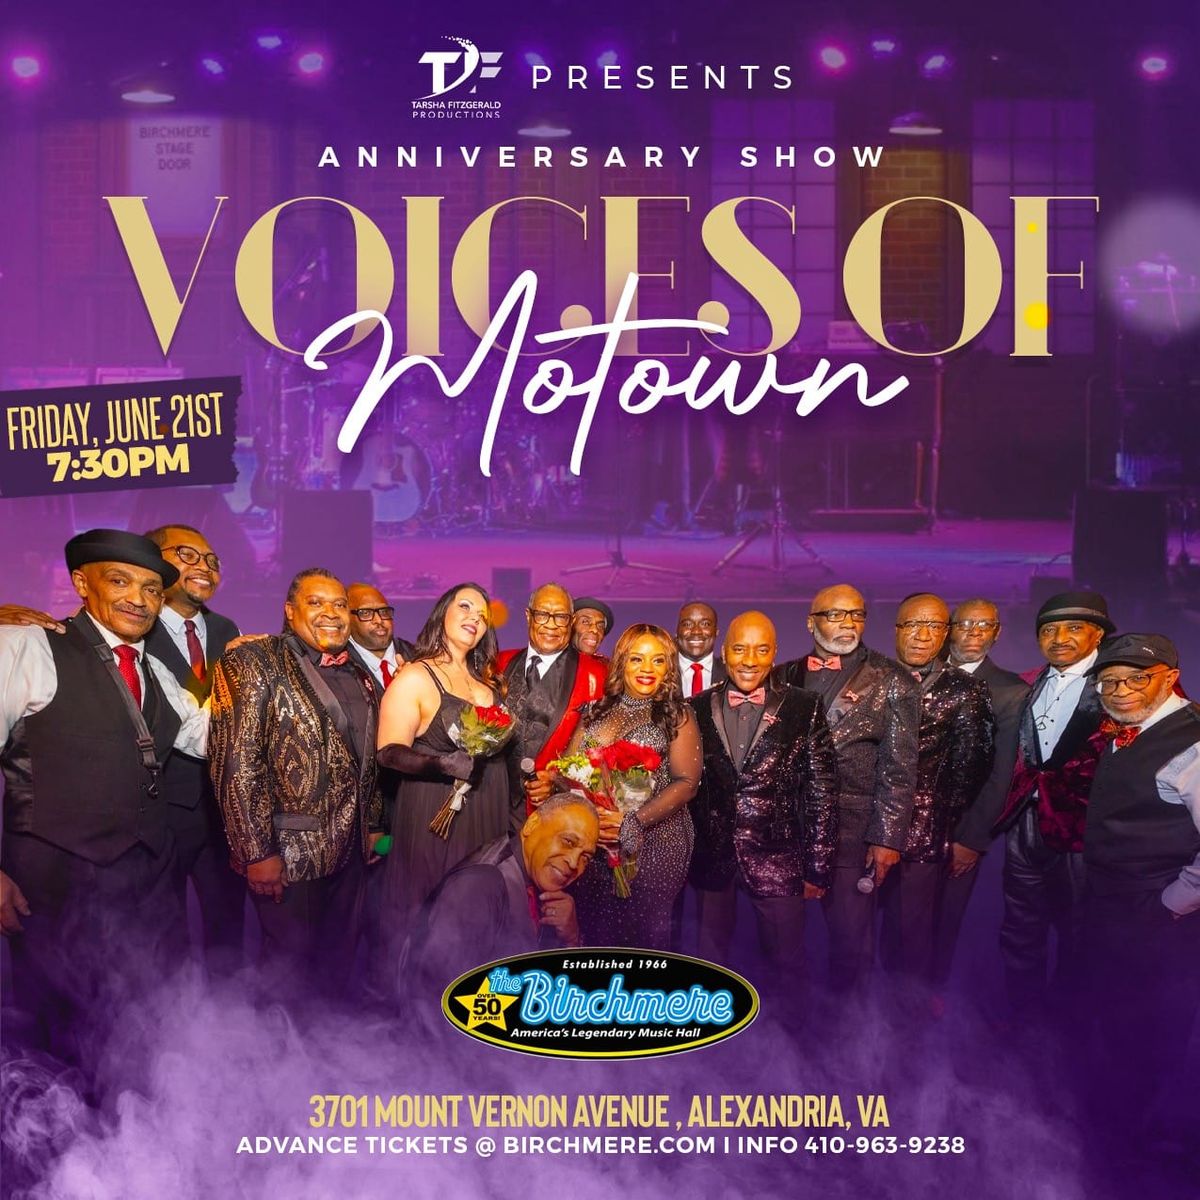 Tarsha Fitzgerald Presents VOICES OF MOTOWN Anniversary Show!